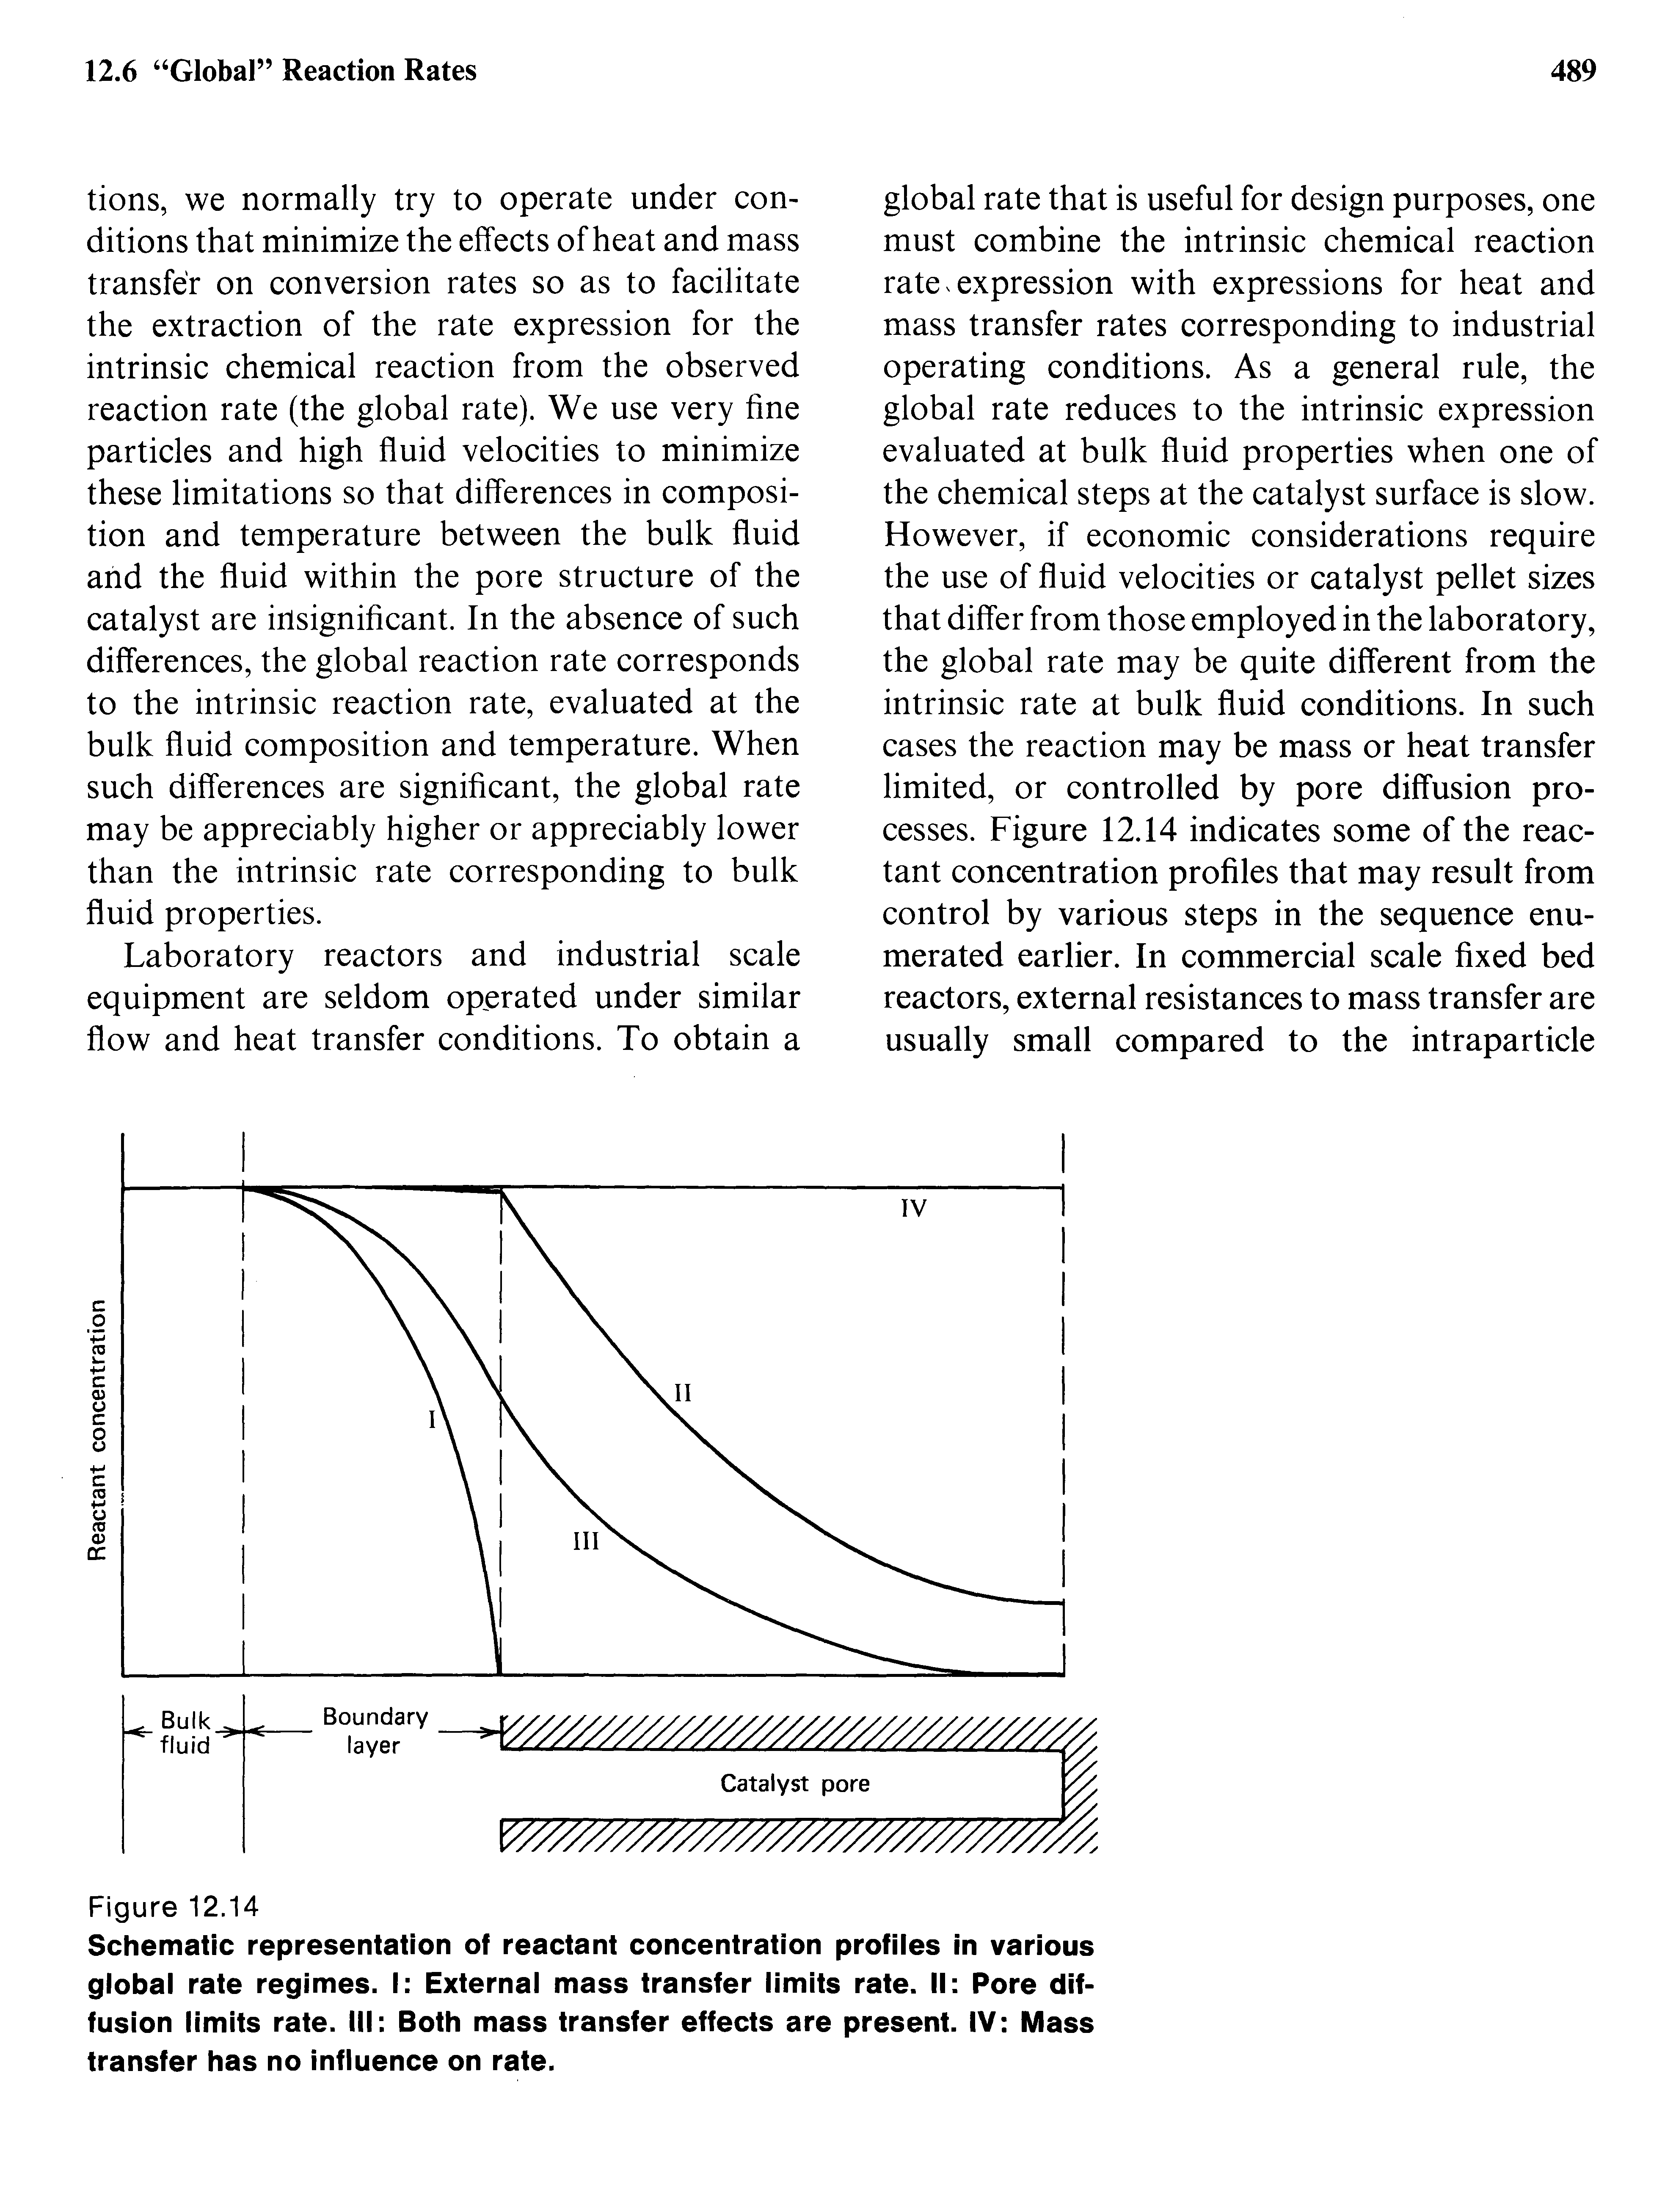 Schematic representation of reactant concentration profiles in various global rate regimes. I External mass transfer limits rate. II Pore diffusion limits rate. Ill Both mass transfer effects are present. IV Mass transfer has no influence on rate.